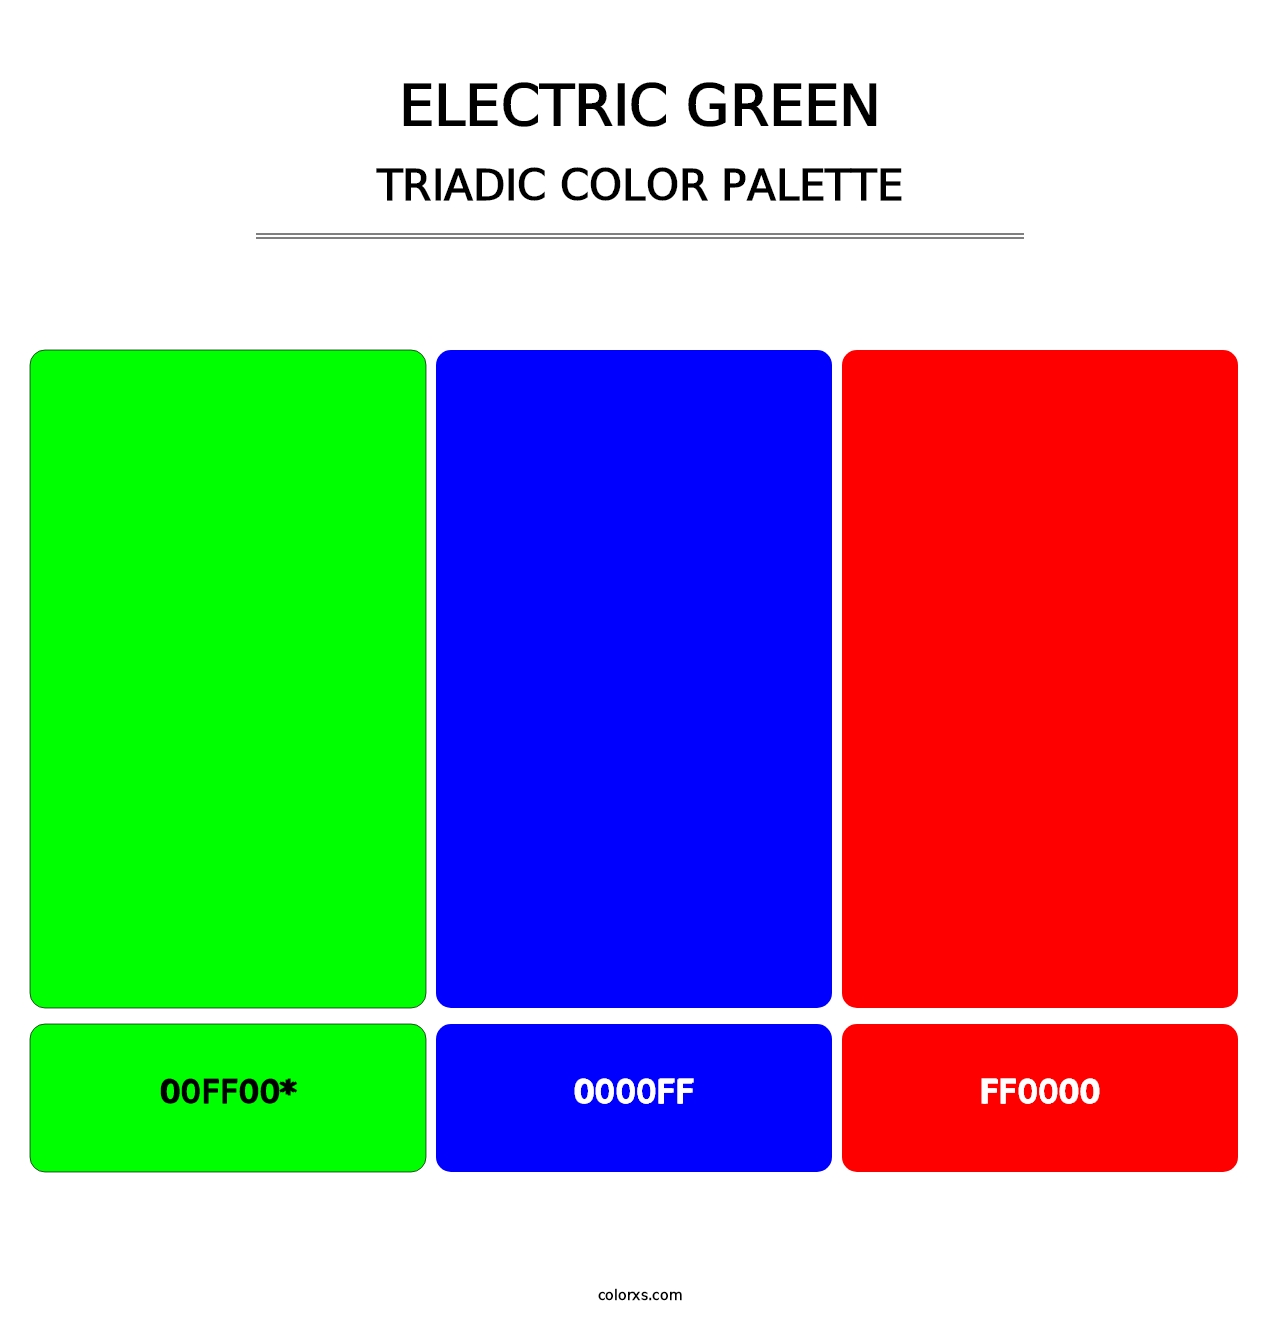 Electric Green - Triadic Color Palette